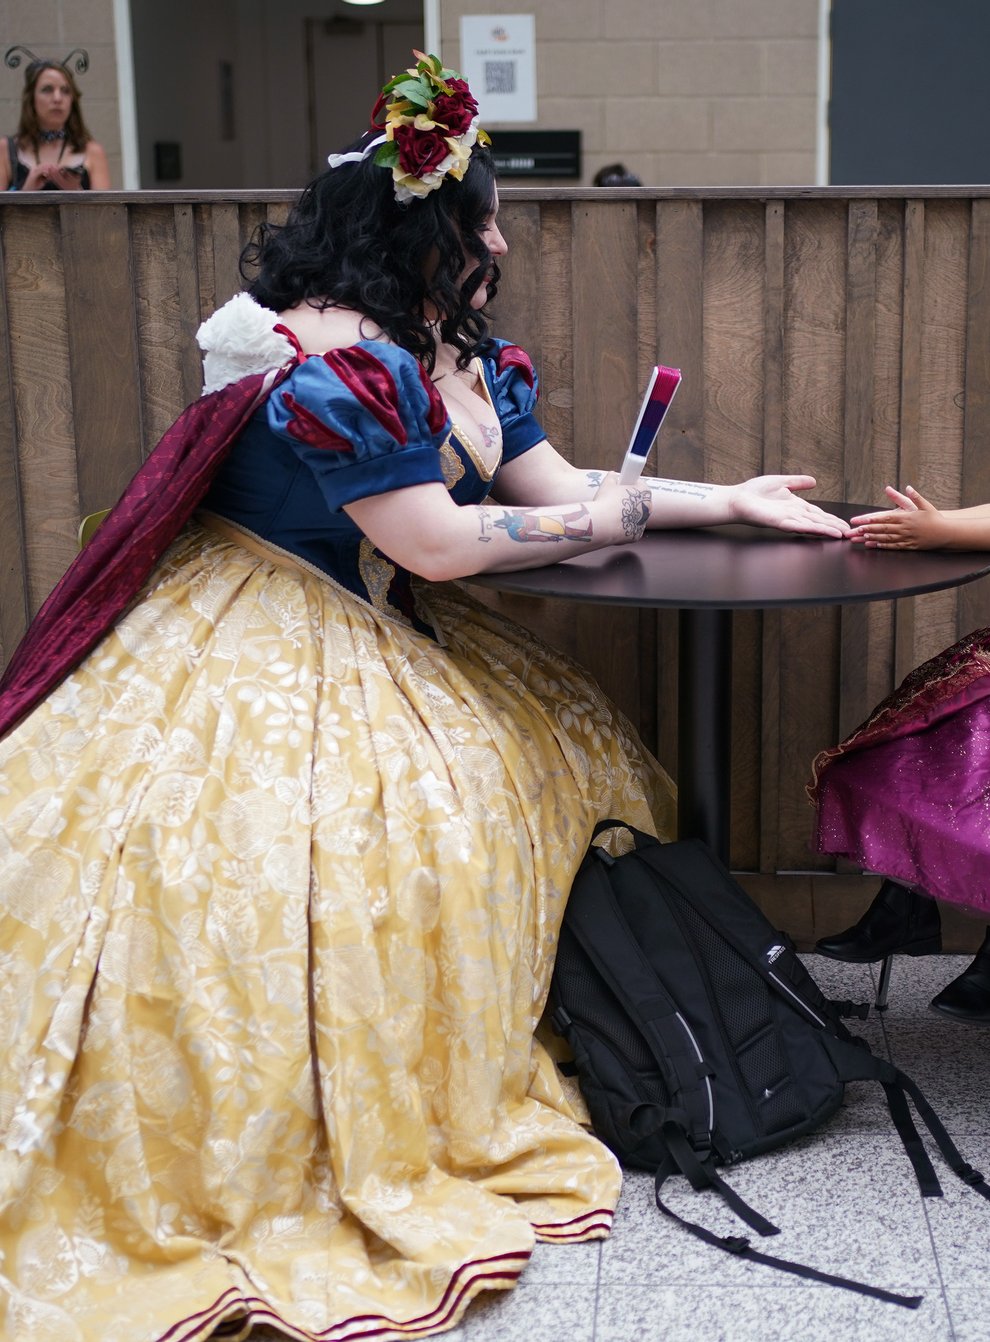 Mother and daughter cosplayers Revan Jordan, left, dressed as Snow White, and Bella, dressed as Rapunzel, during MCM Comic Con at the ExCel in London (Yui Mok/PA)